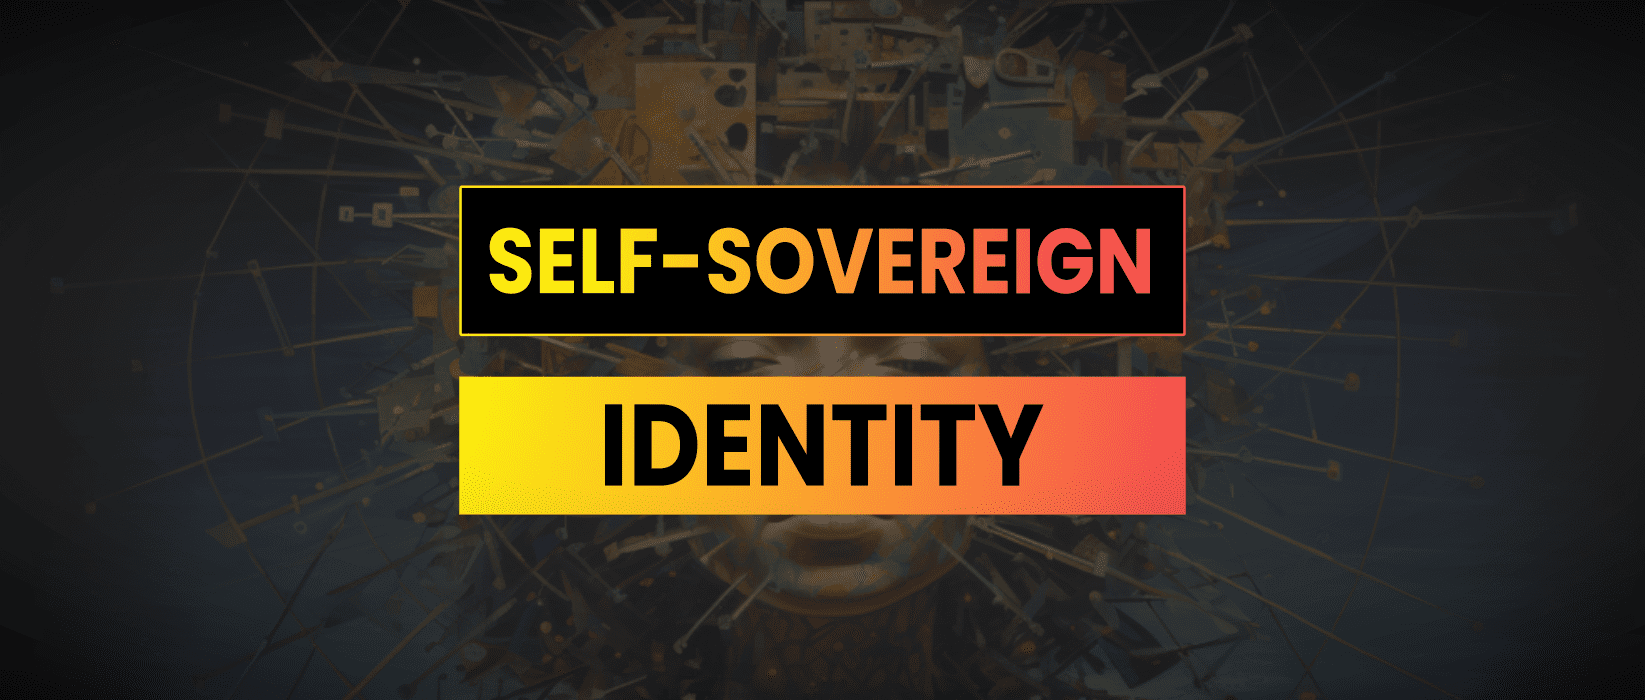 Emergent use cases for self-sovereign identity in DeFi